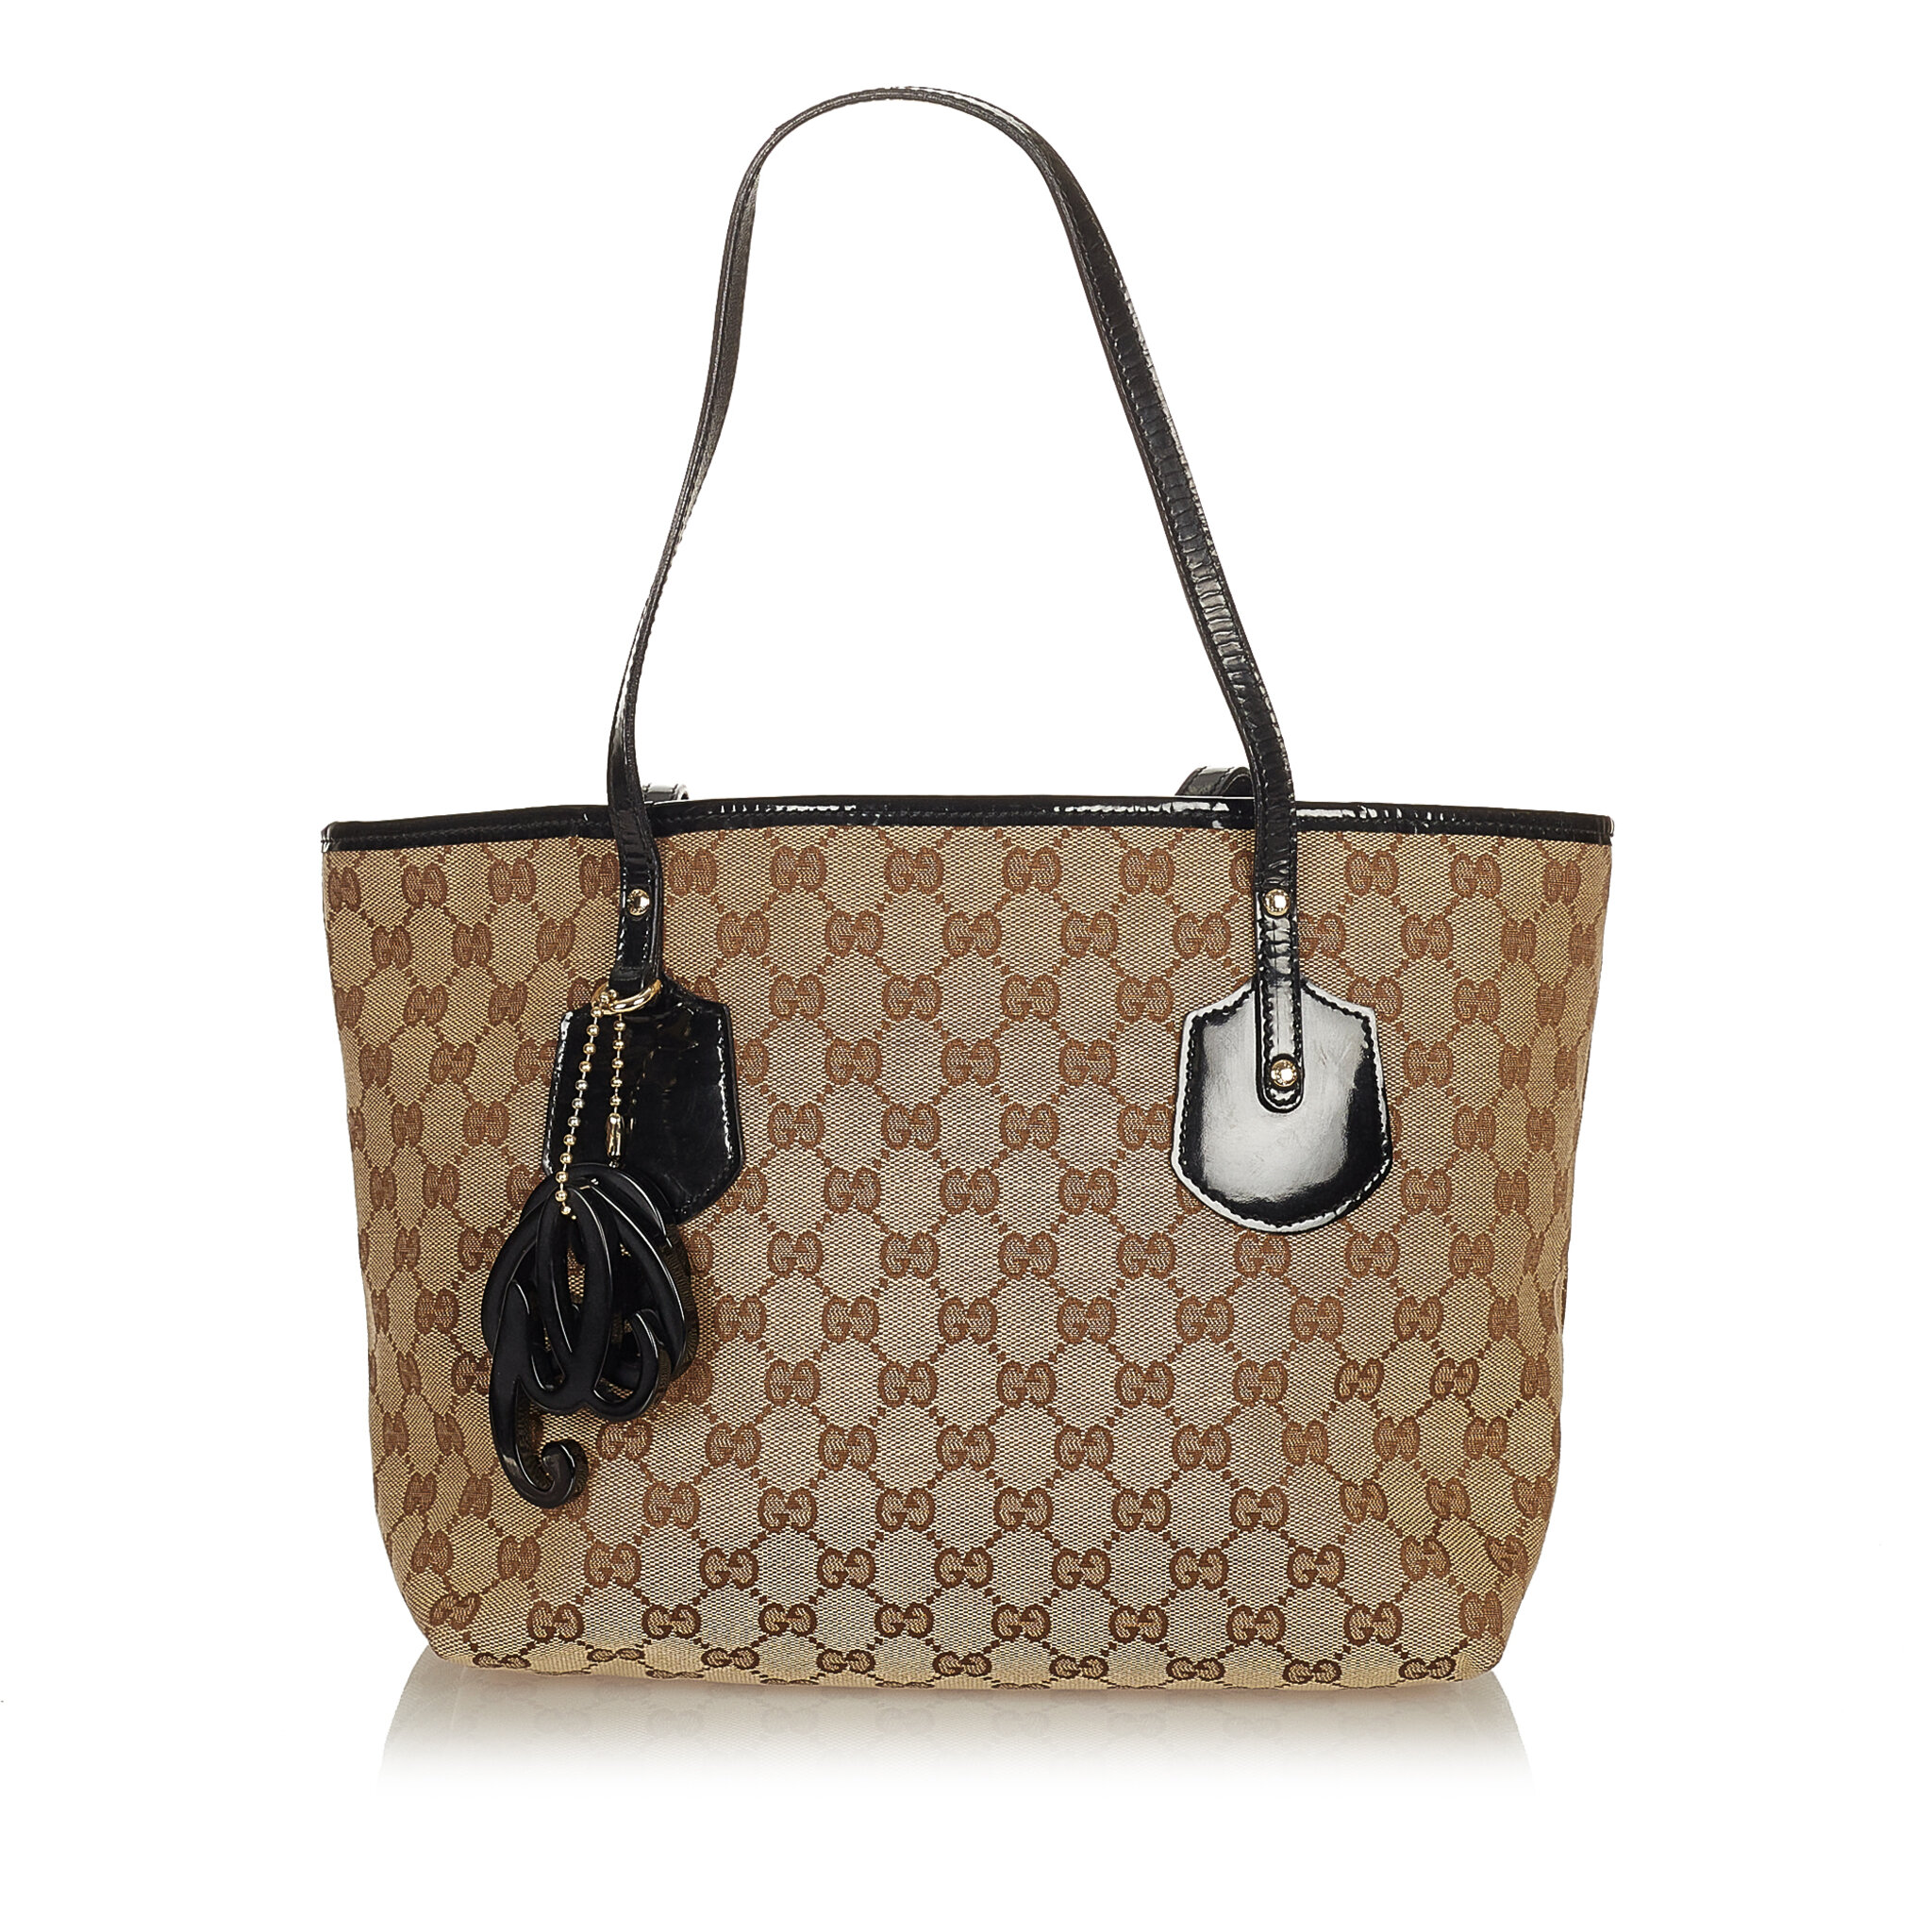 Gucci Gg Canvas Jolie Tote Bag, ONESIZE, beige